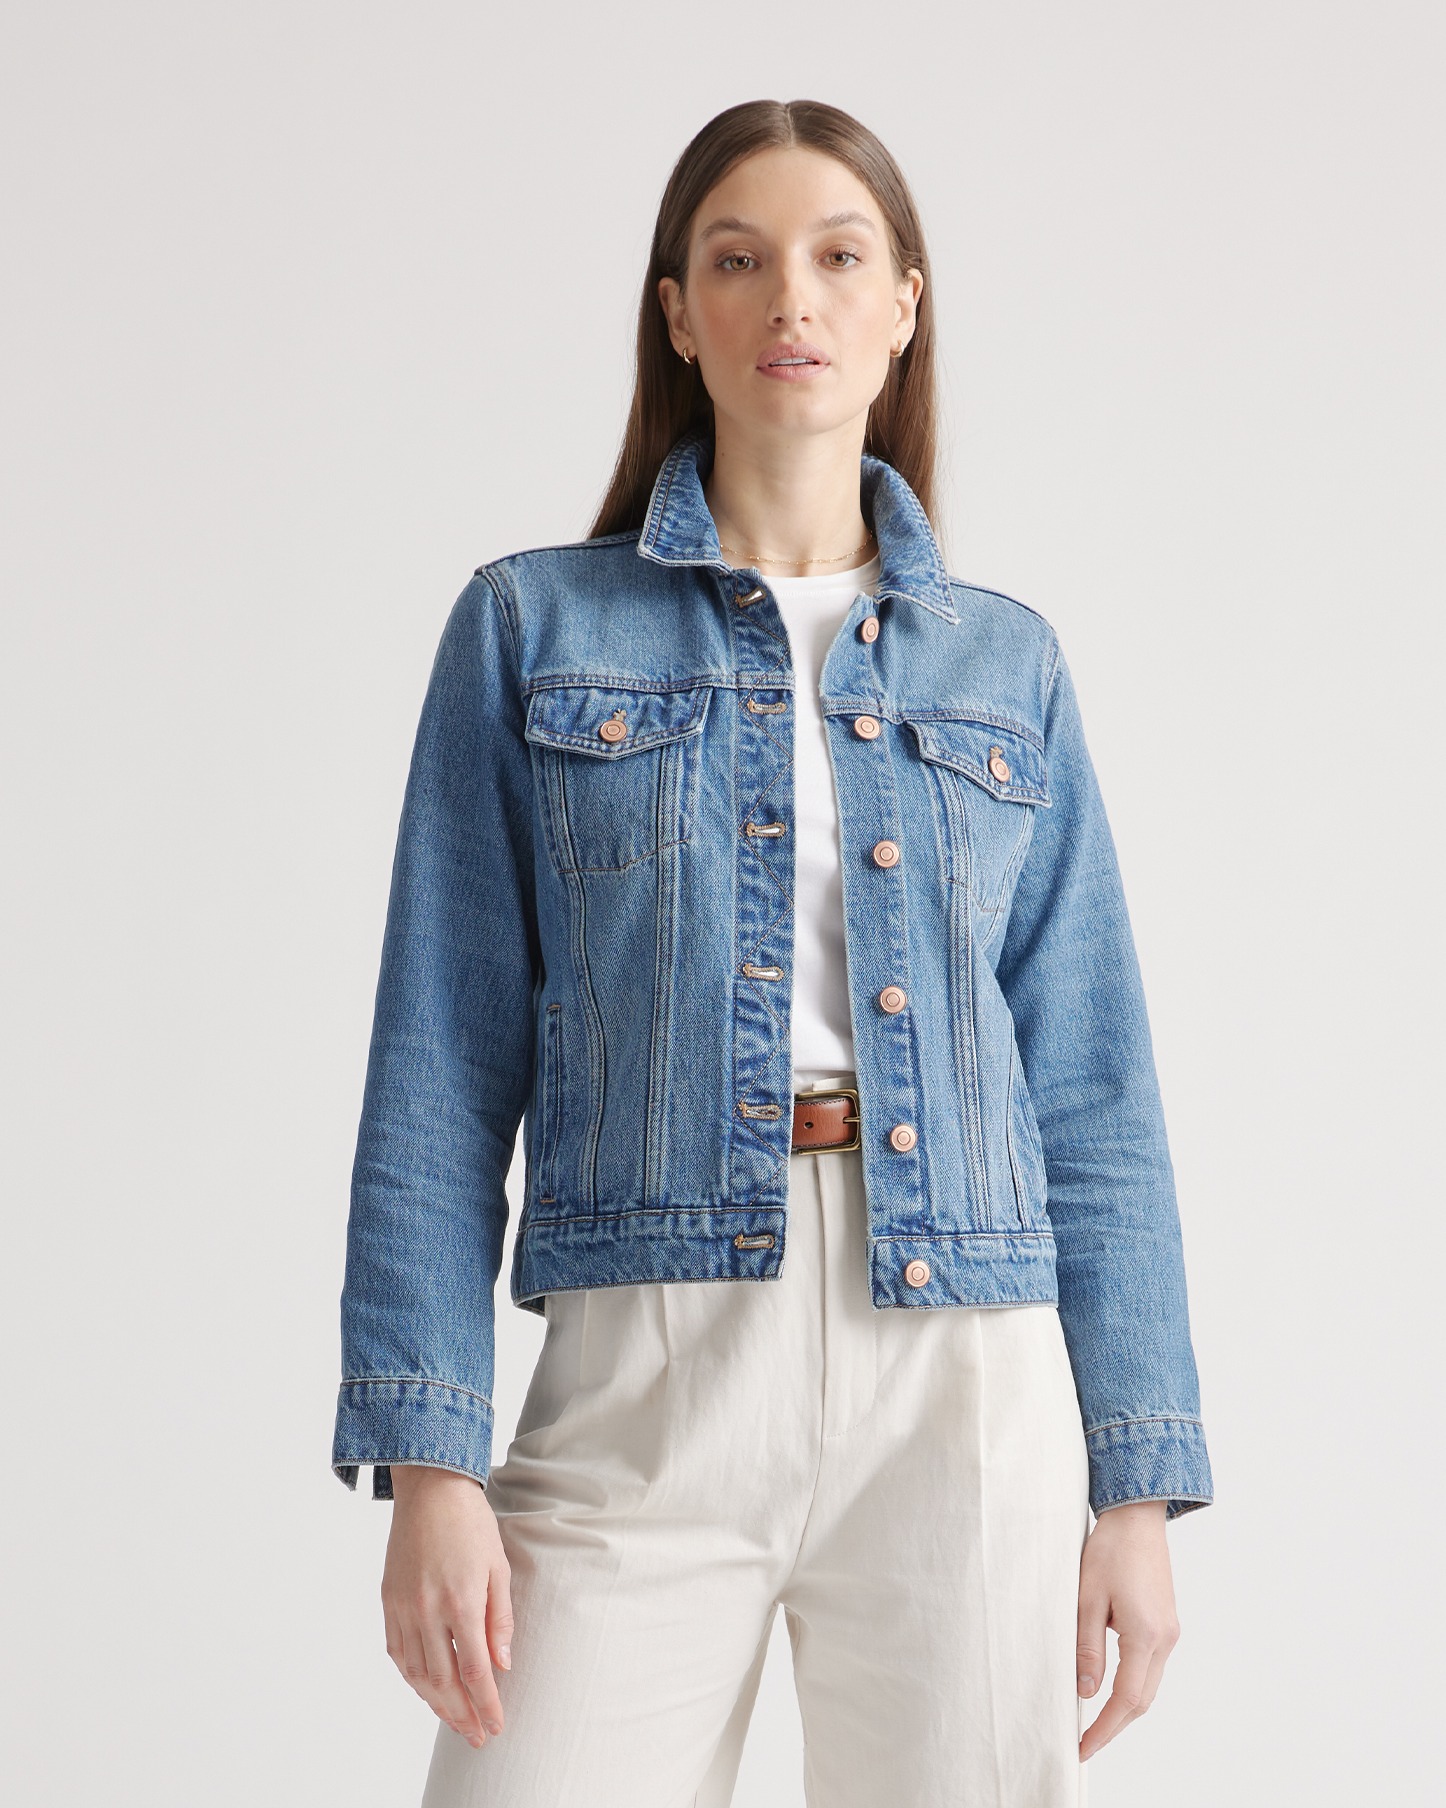 Styling tips on how to wear a Cropped Denim Jacket – Onpost